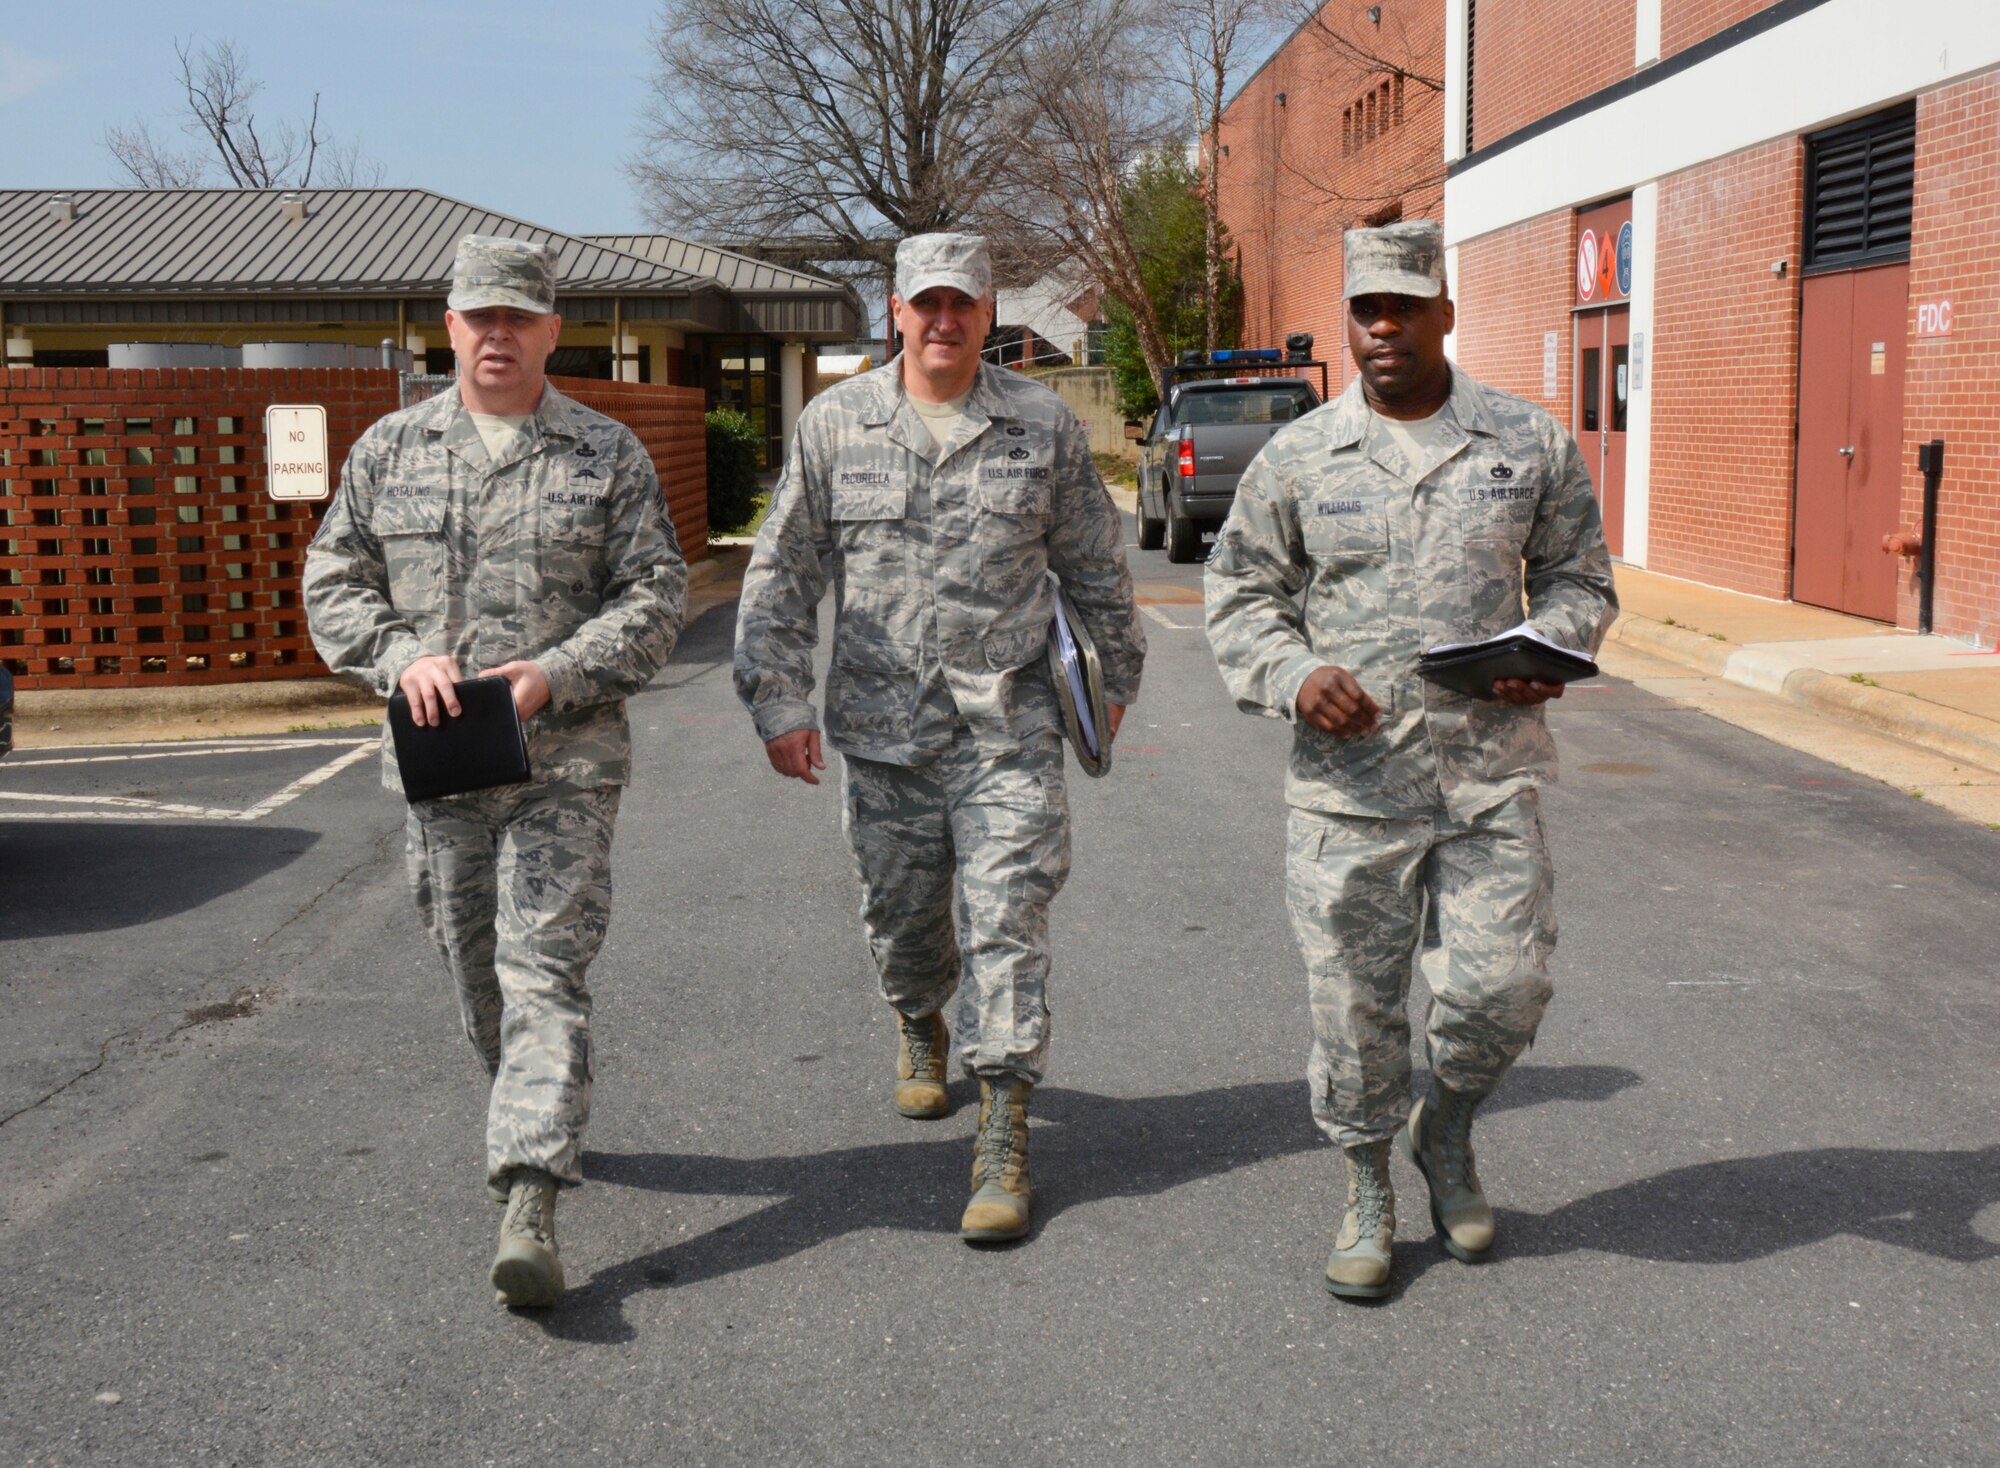 U.S. Air Force Chief Master Sgt. James W. Hotaling (left), command chief master sergeant of the Air National Guard, Chief Master Sgt. Salvatore Pecorella (center), command chief for the 145th Airlift Wing, and Chief Master Sgt. Maurice Williams (right), state command chief for the N.C. Air National Guard, walk about the N.C. Air National Guard Base, at Charlotte Douglas International Airport, March 12, 2016, following several motivating and inspirational leadership meetings with various Airmen.  (U.S. Air National Guard photo by Master Sgt. Rich Kerner/Released)